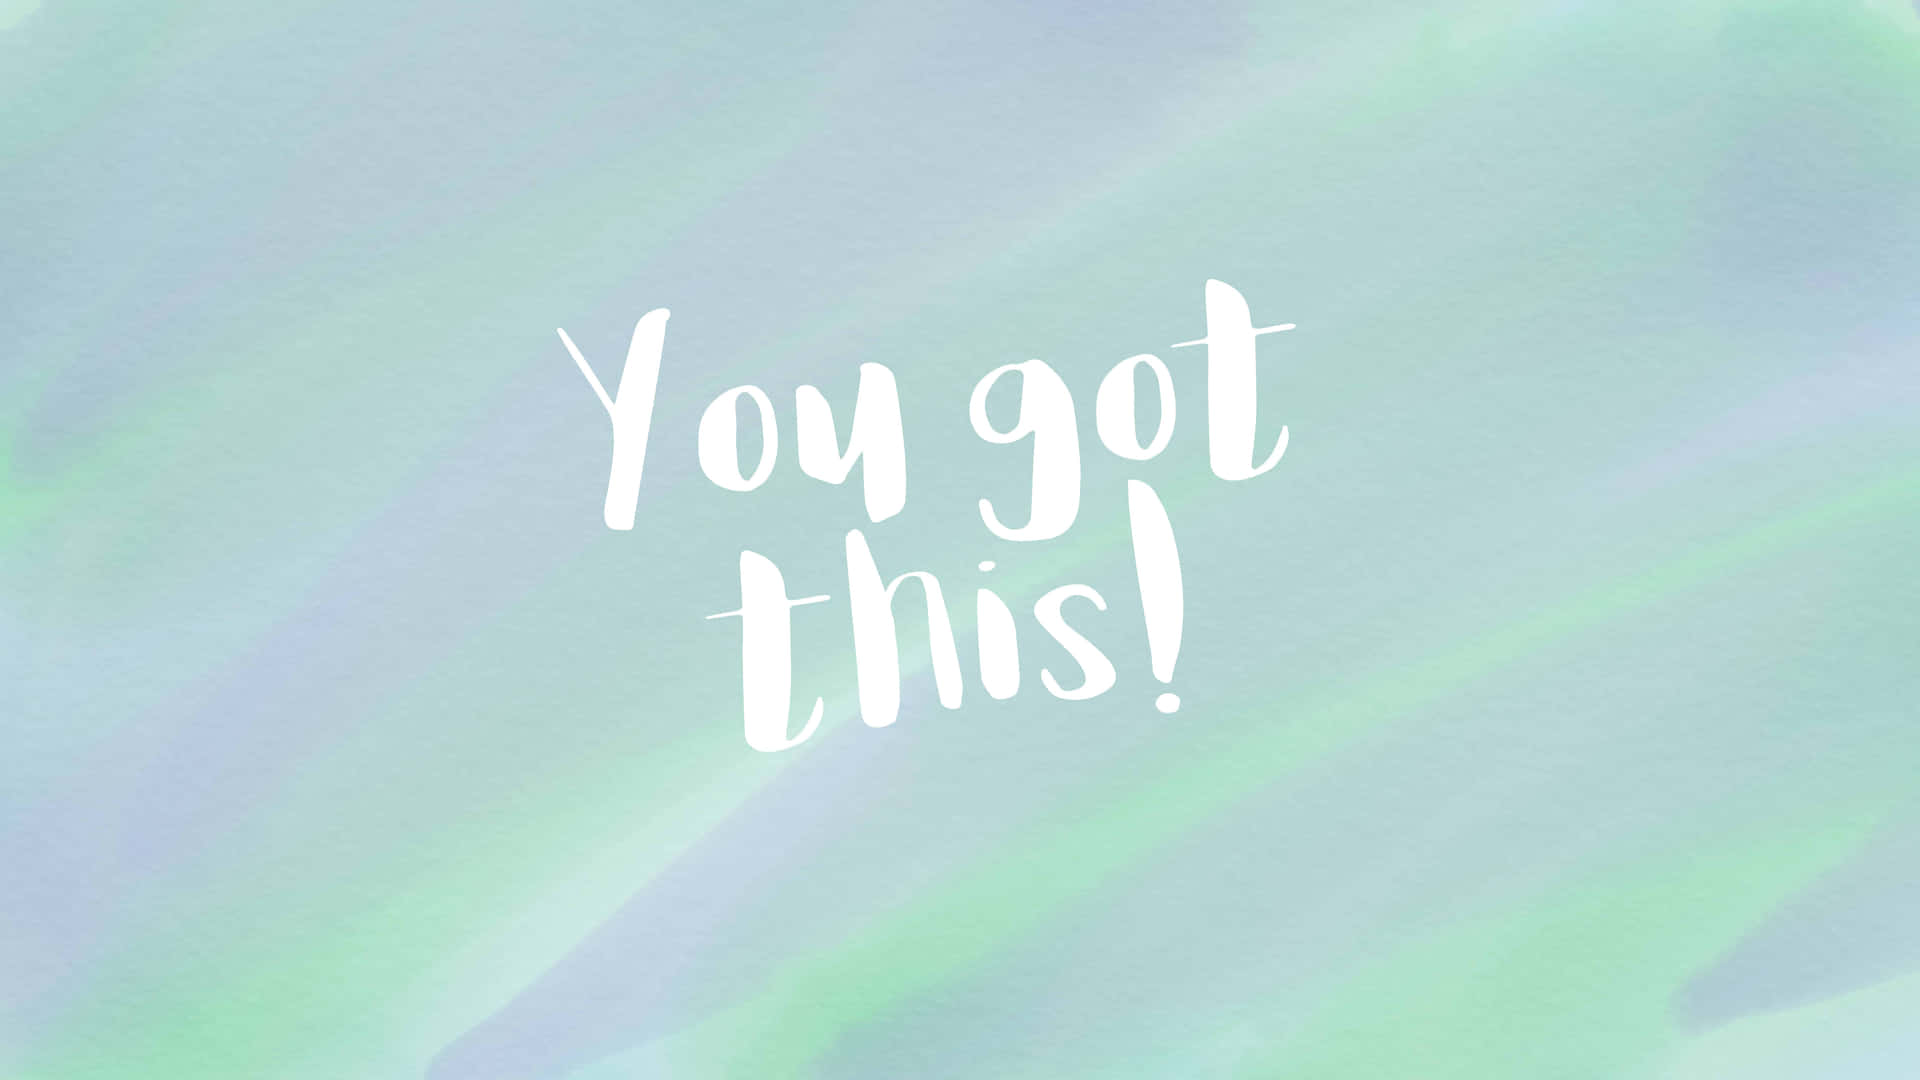 Believe In Yourself - You Got This Background